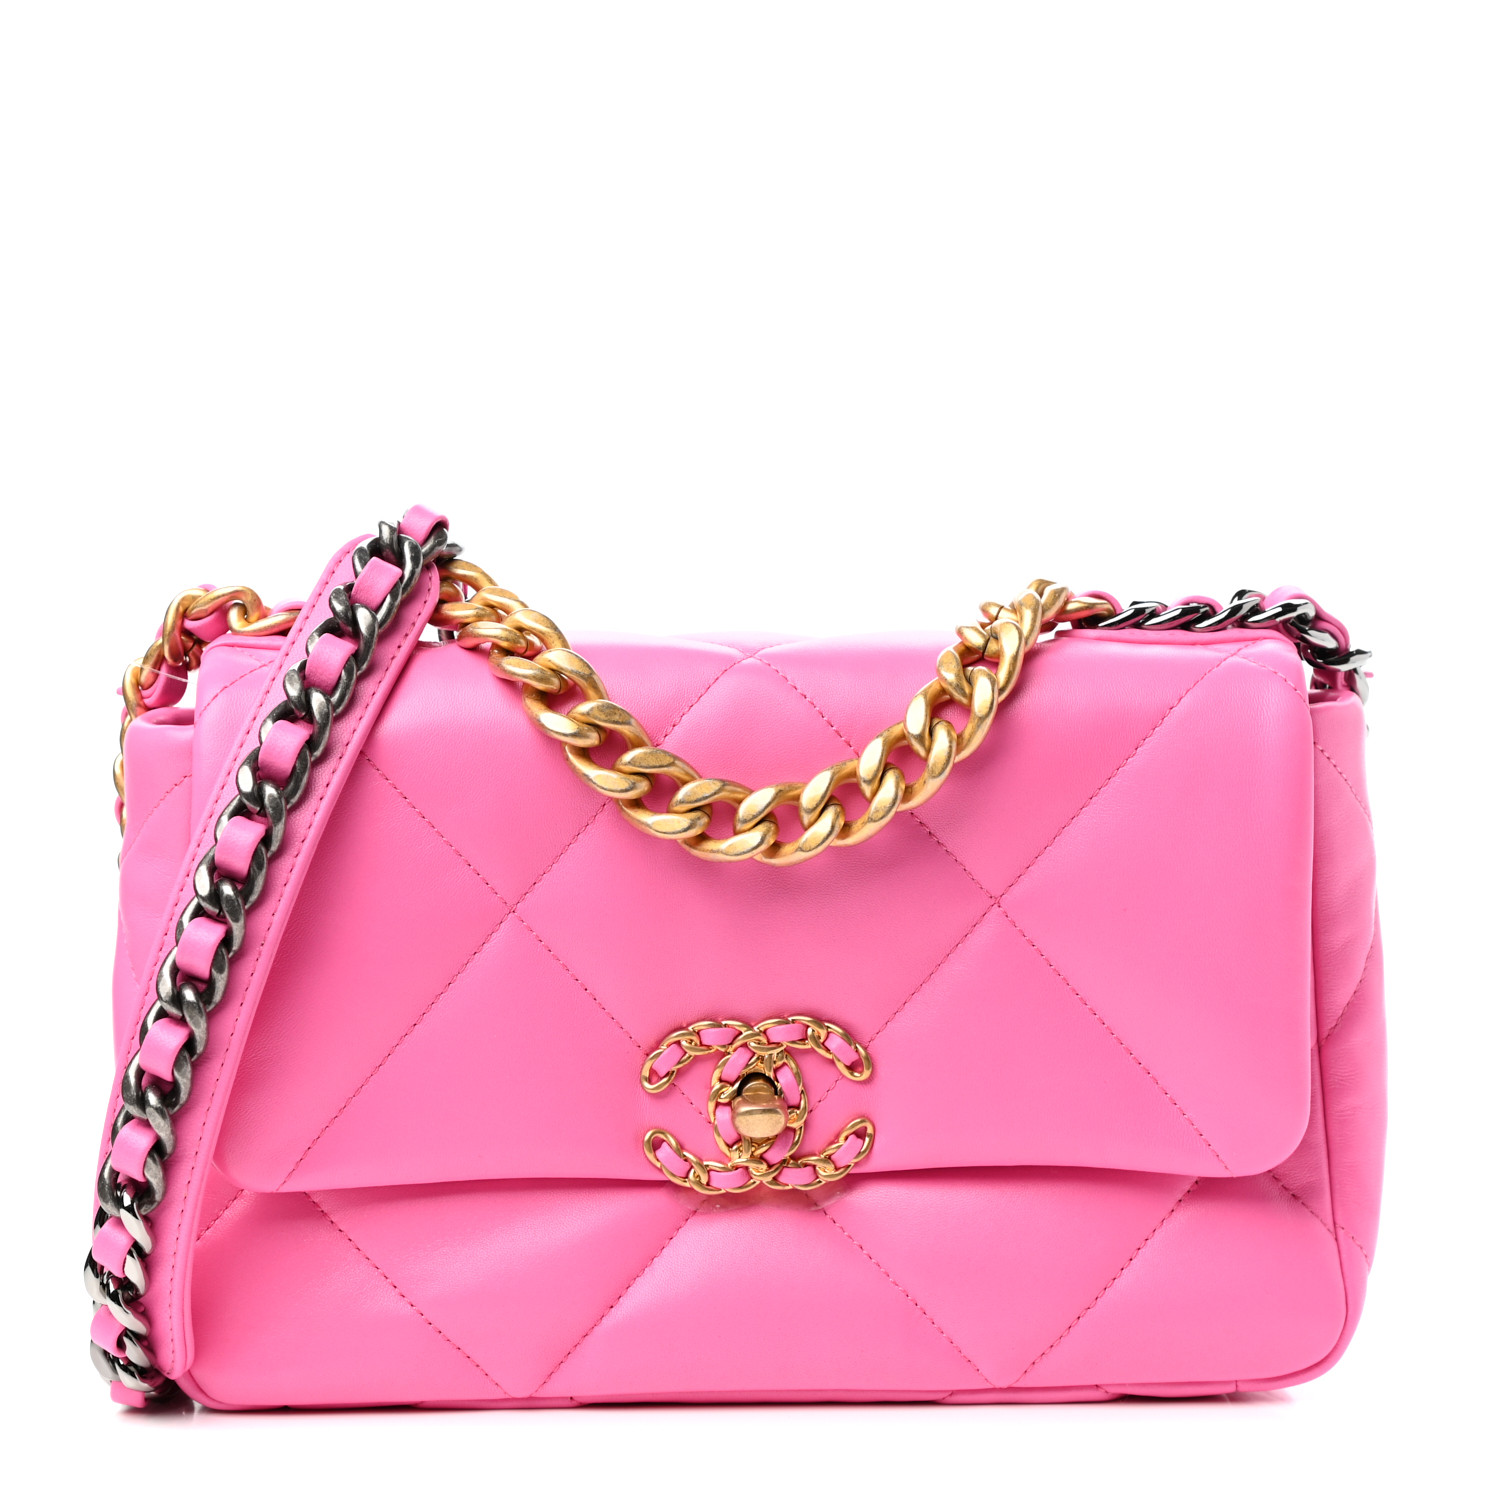 CHANEL Shiny Lambskin Quilted Medium Chanel 19 Flap Neon Pink 769742 ...